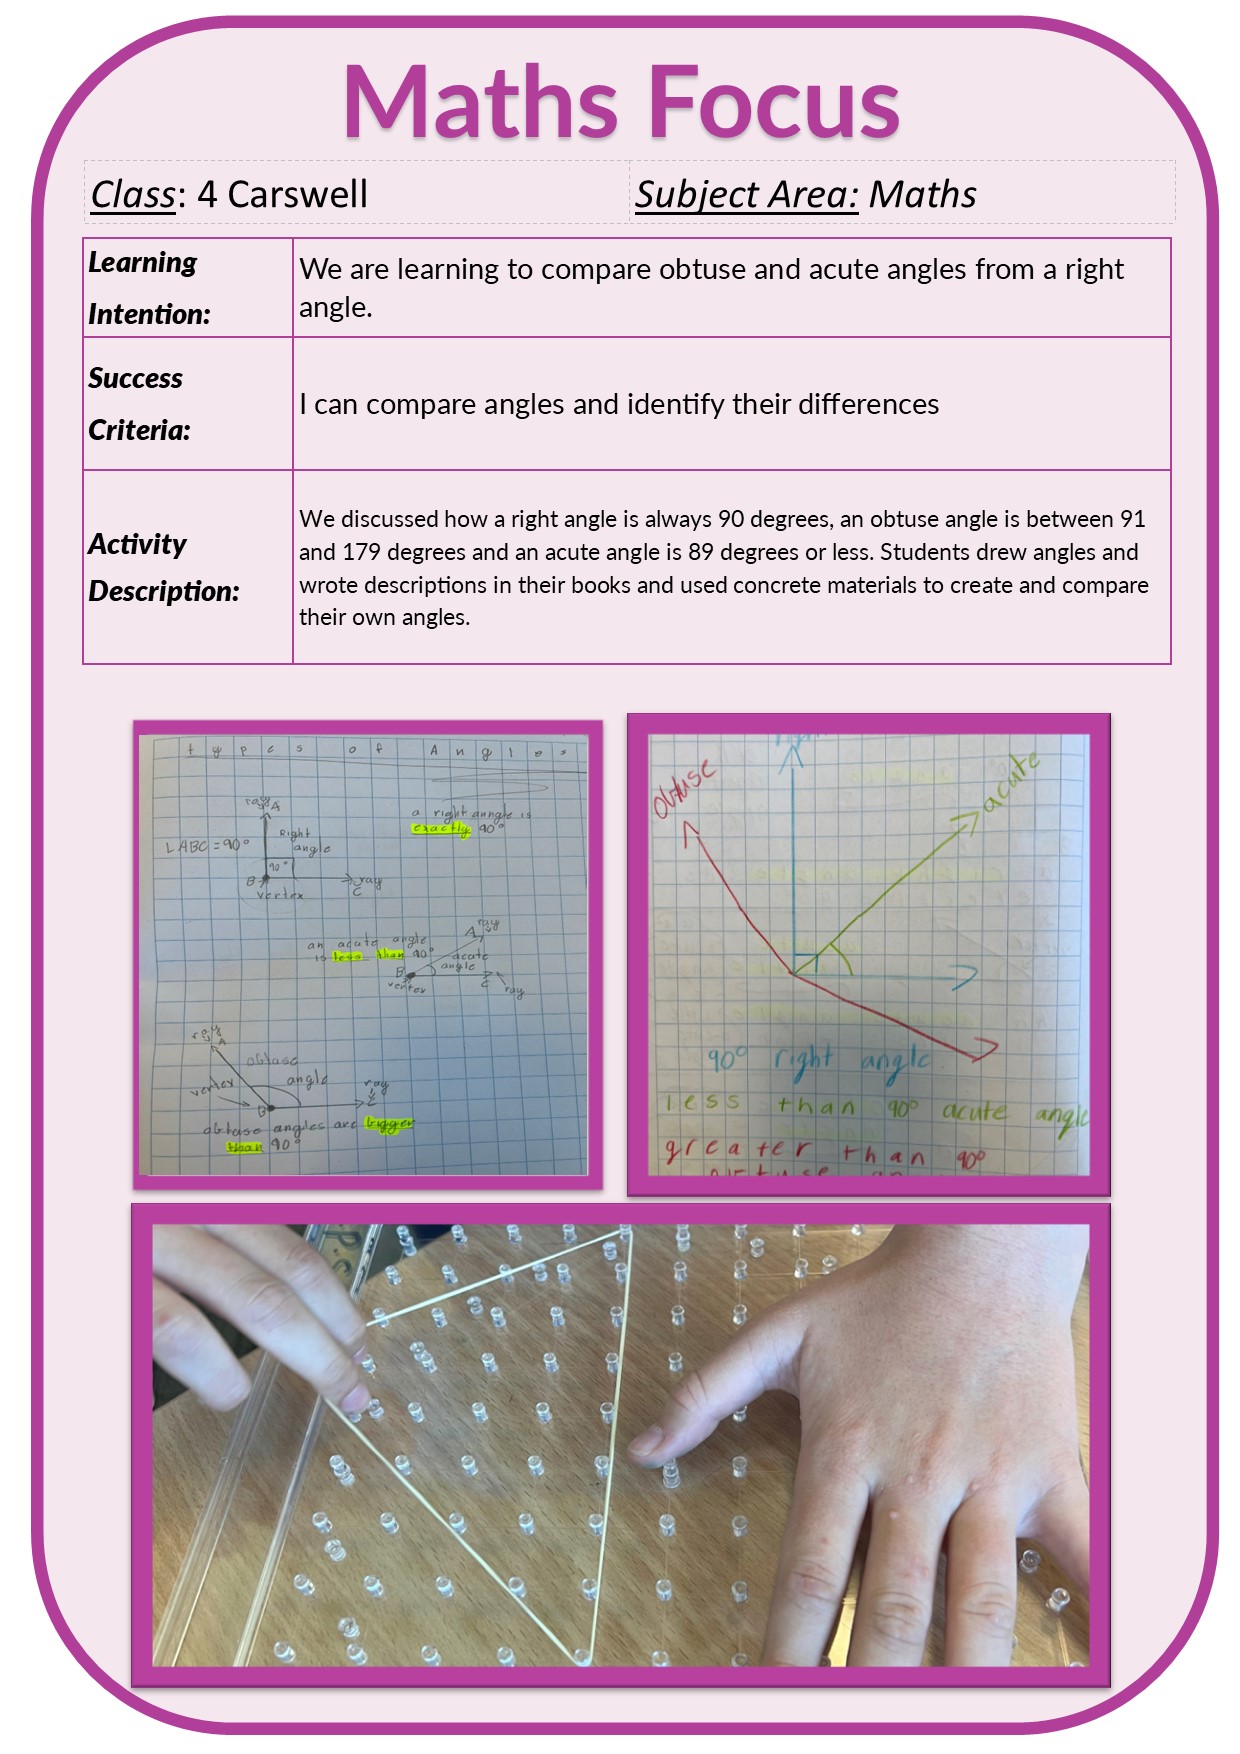 Visible Learning/4 Carswell Maths - Term 2 Week 2.jpg